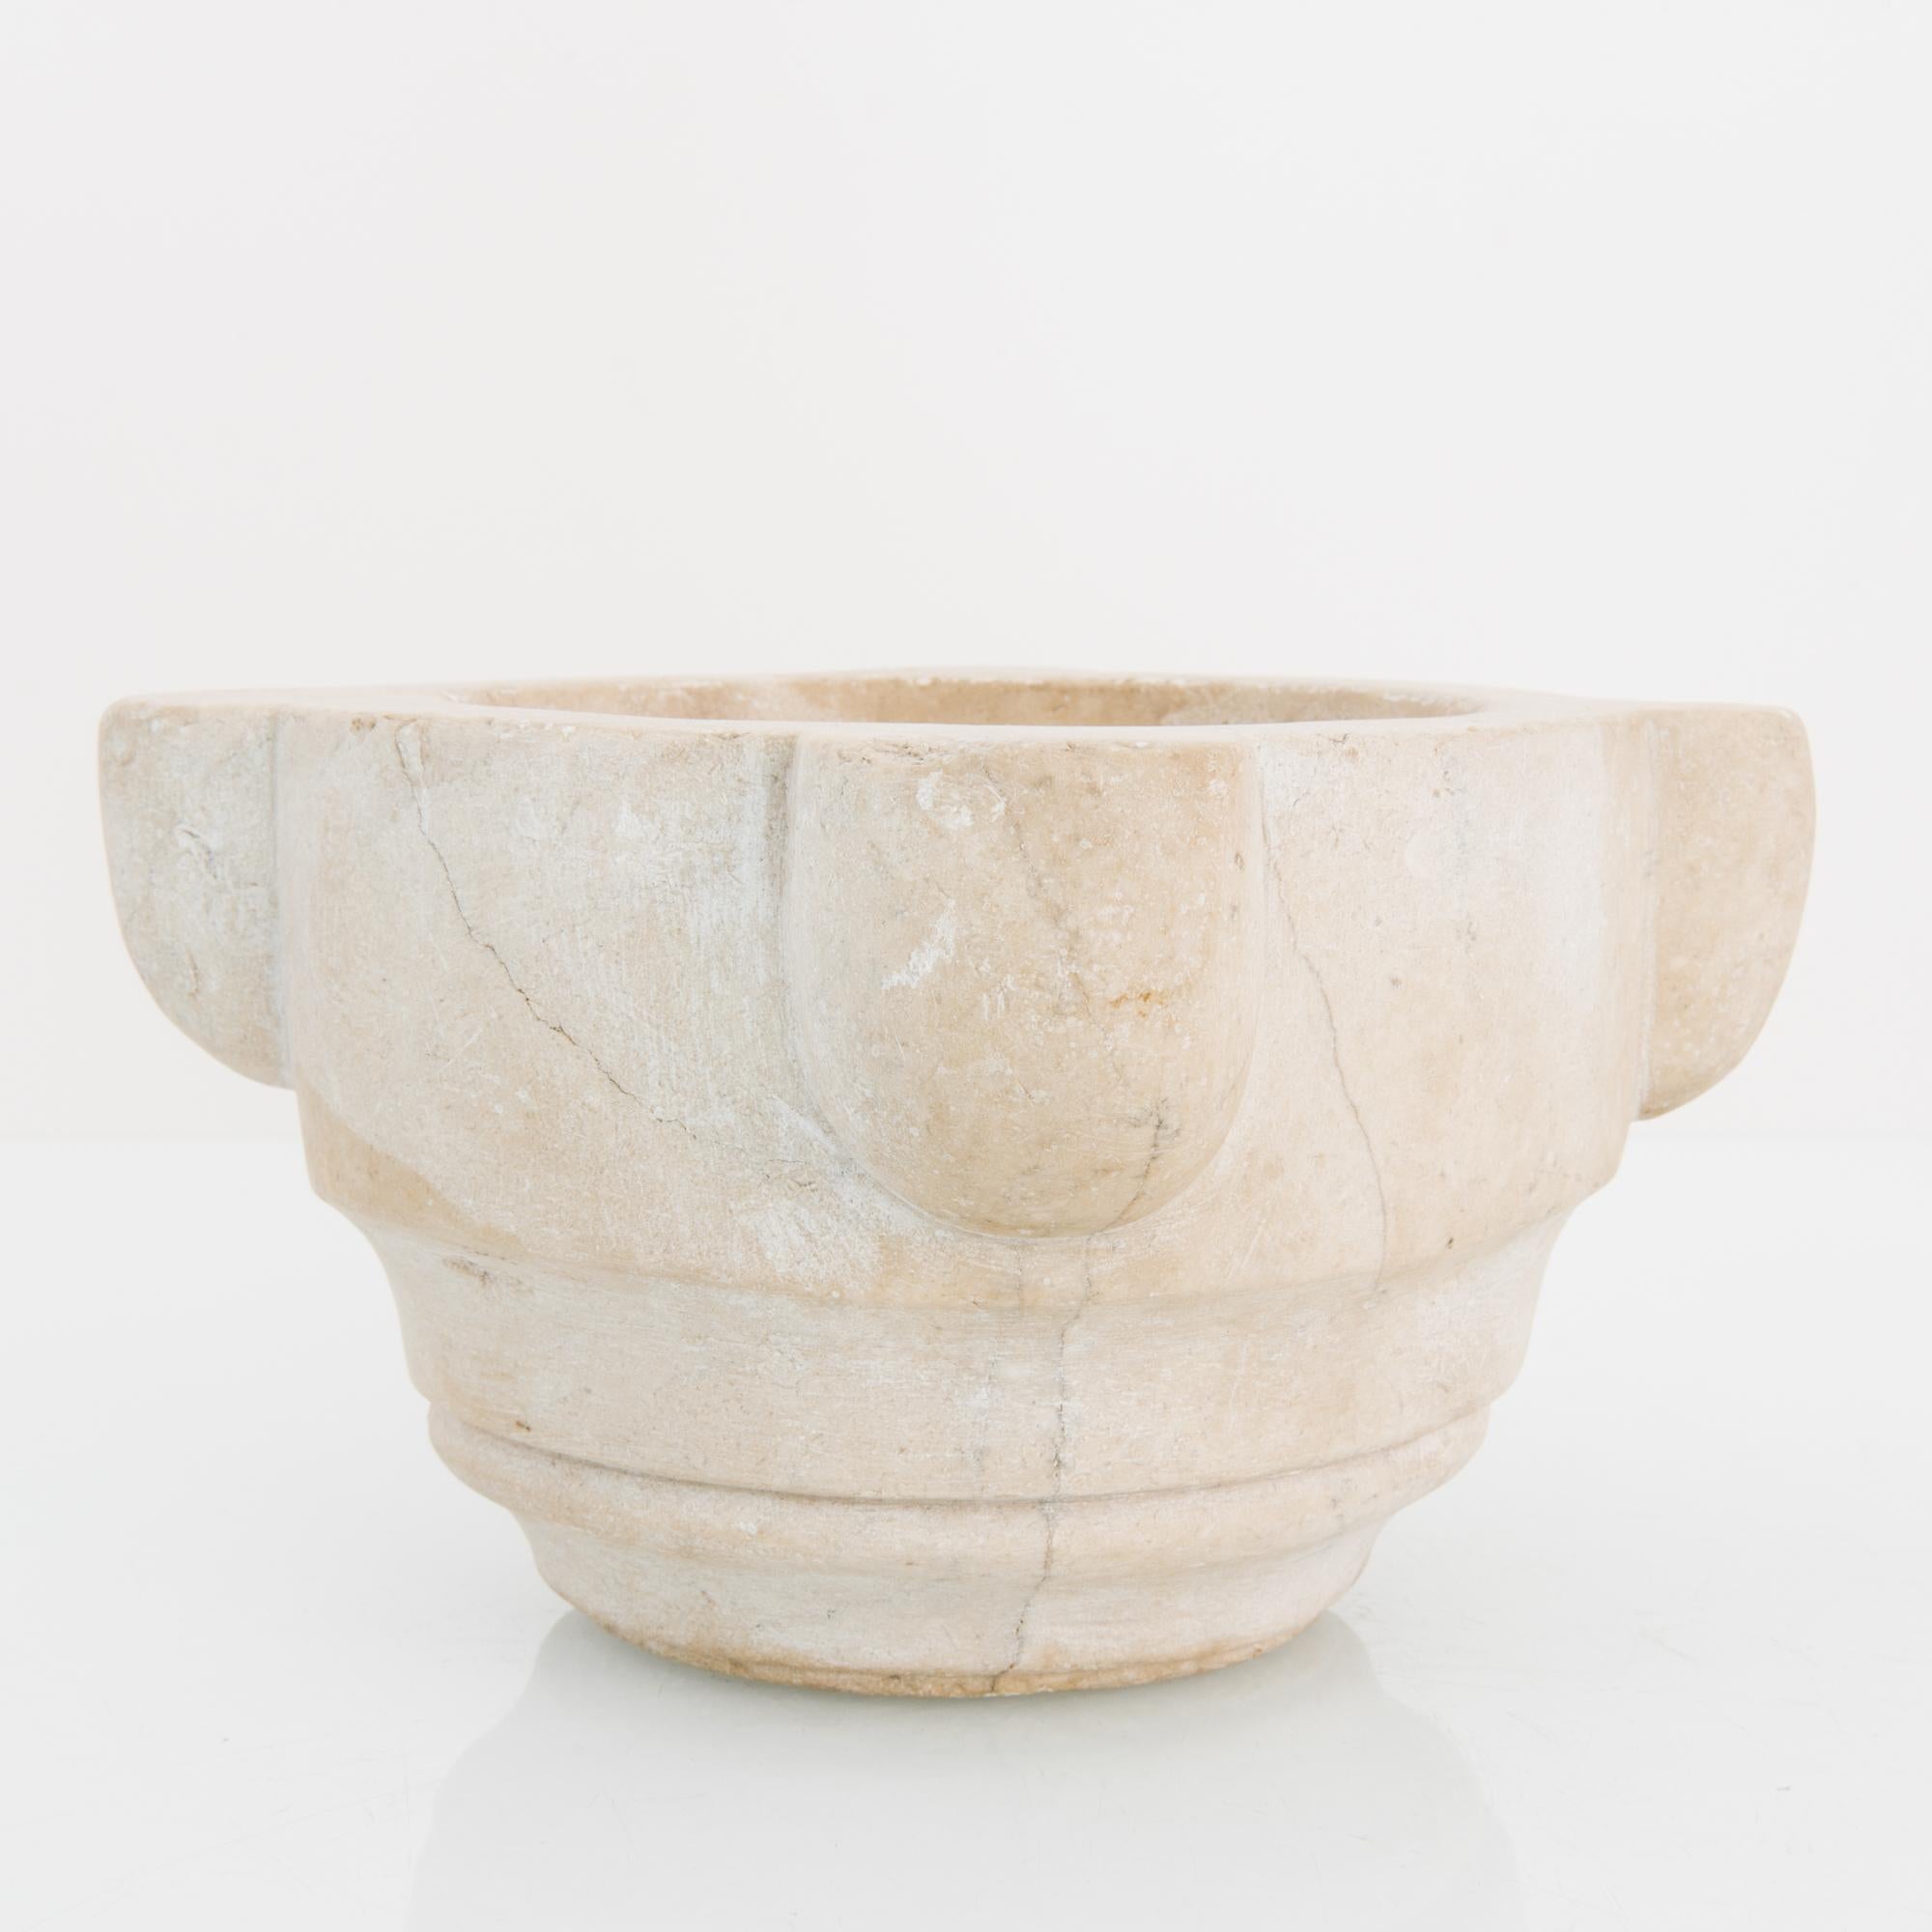 A stone mortar from France, circa 1800. Rustic and refined, the mortar is rendered in cloudy beige marble; the sculpted organic shape giving an effortless shape to hefty marble. The materiality of this timeless antique imparts an immediate tactile